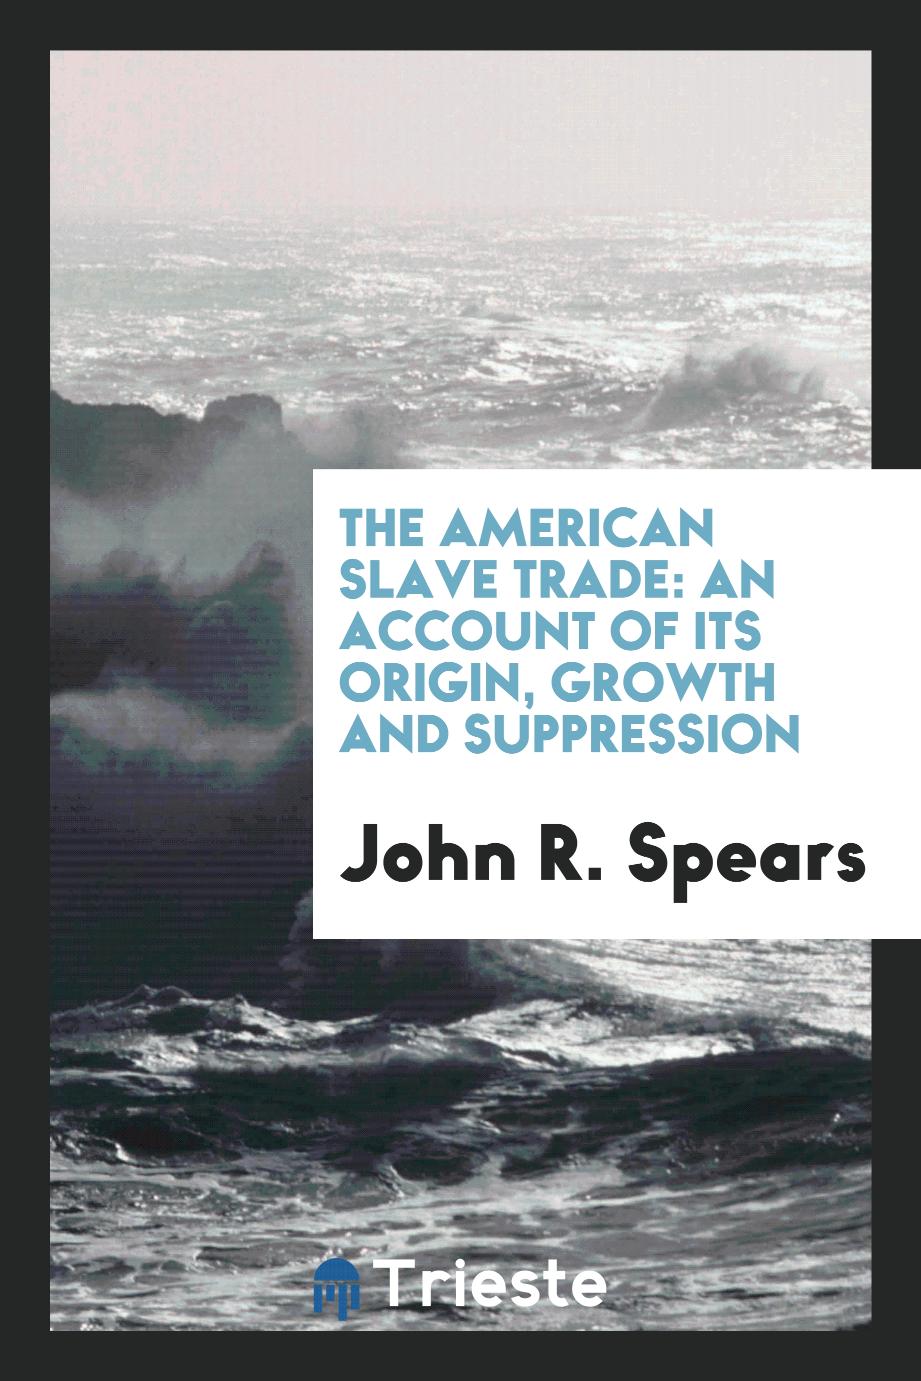 The American Slave Trade: An Account of Its Origin, Growth and Suppression